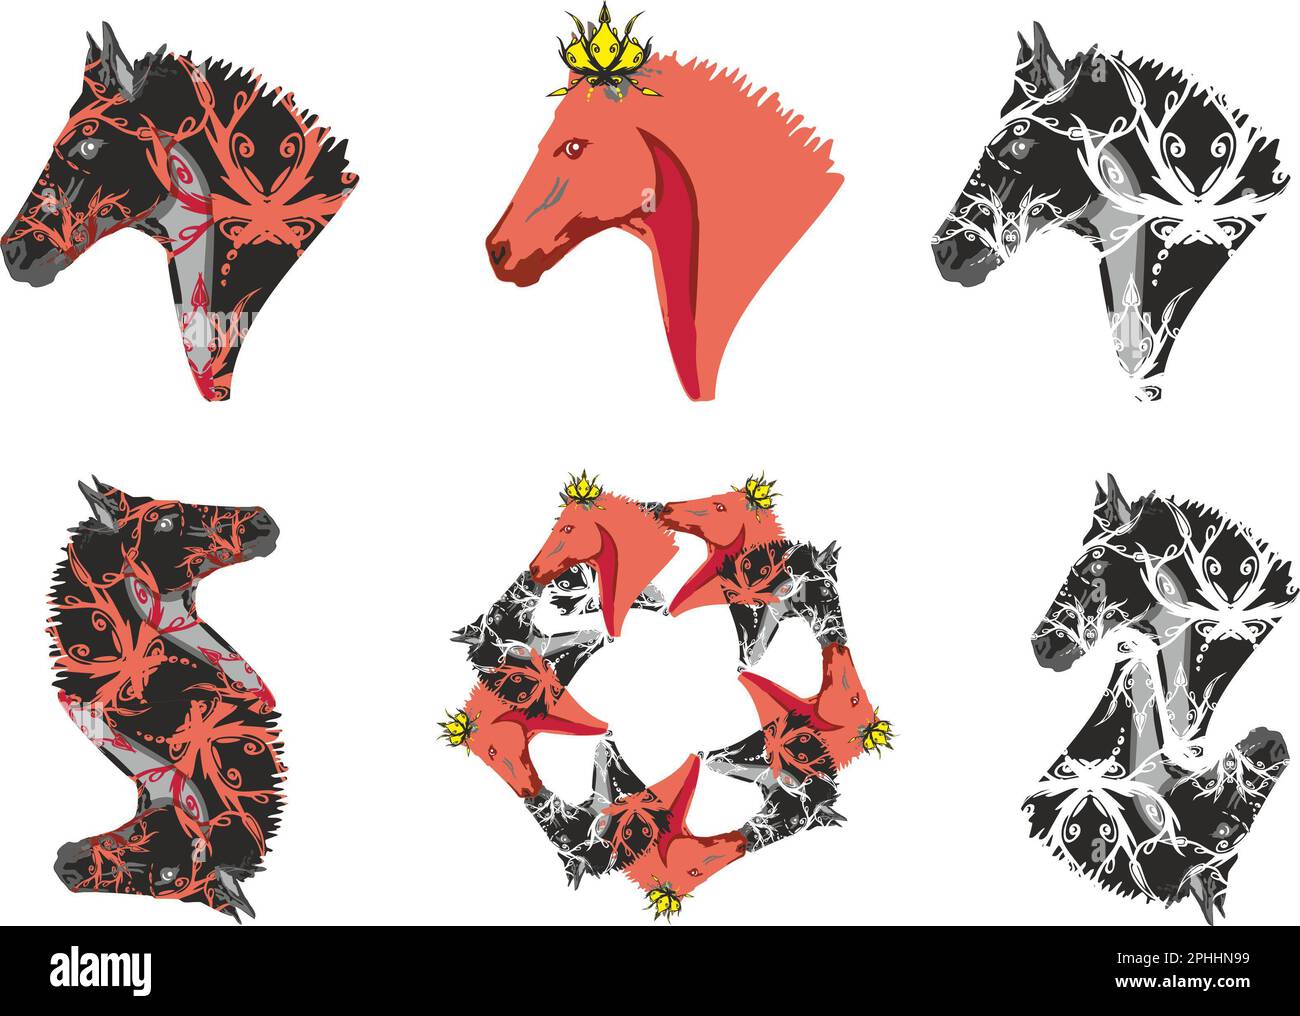 Ornamental horse head and symbols from it for prints on T-shirts or textiles. Ornate horse symbols and horse frame for emblems, tattoos, wallpapers Stock Photo